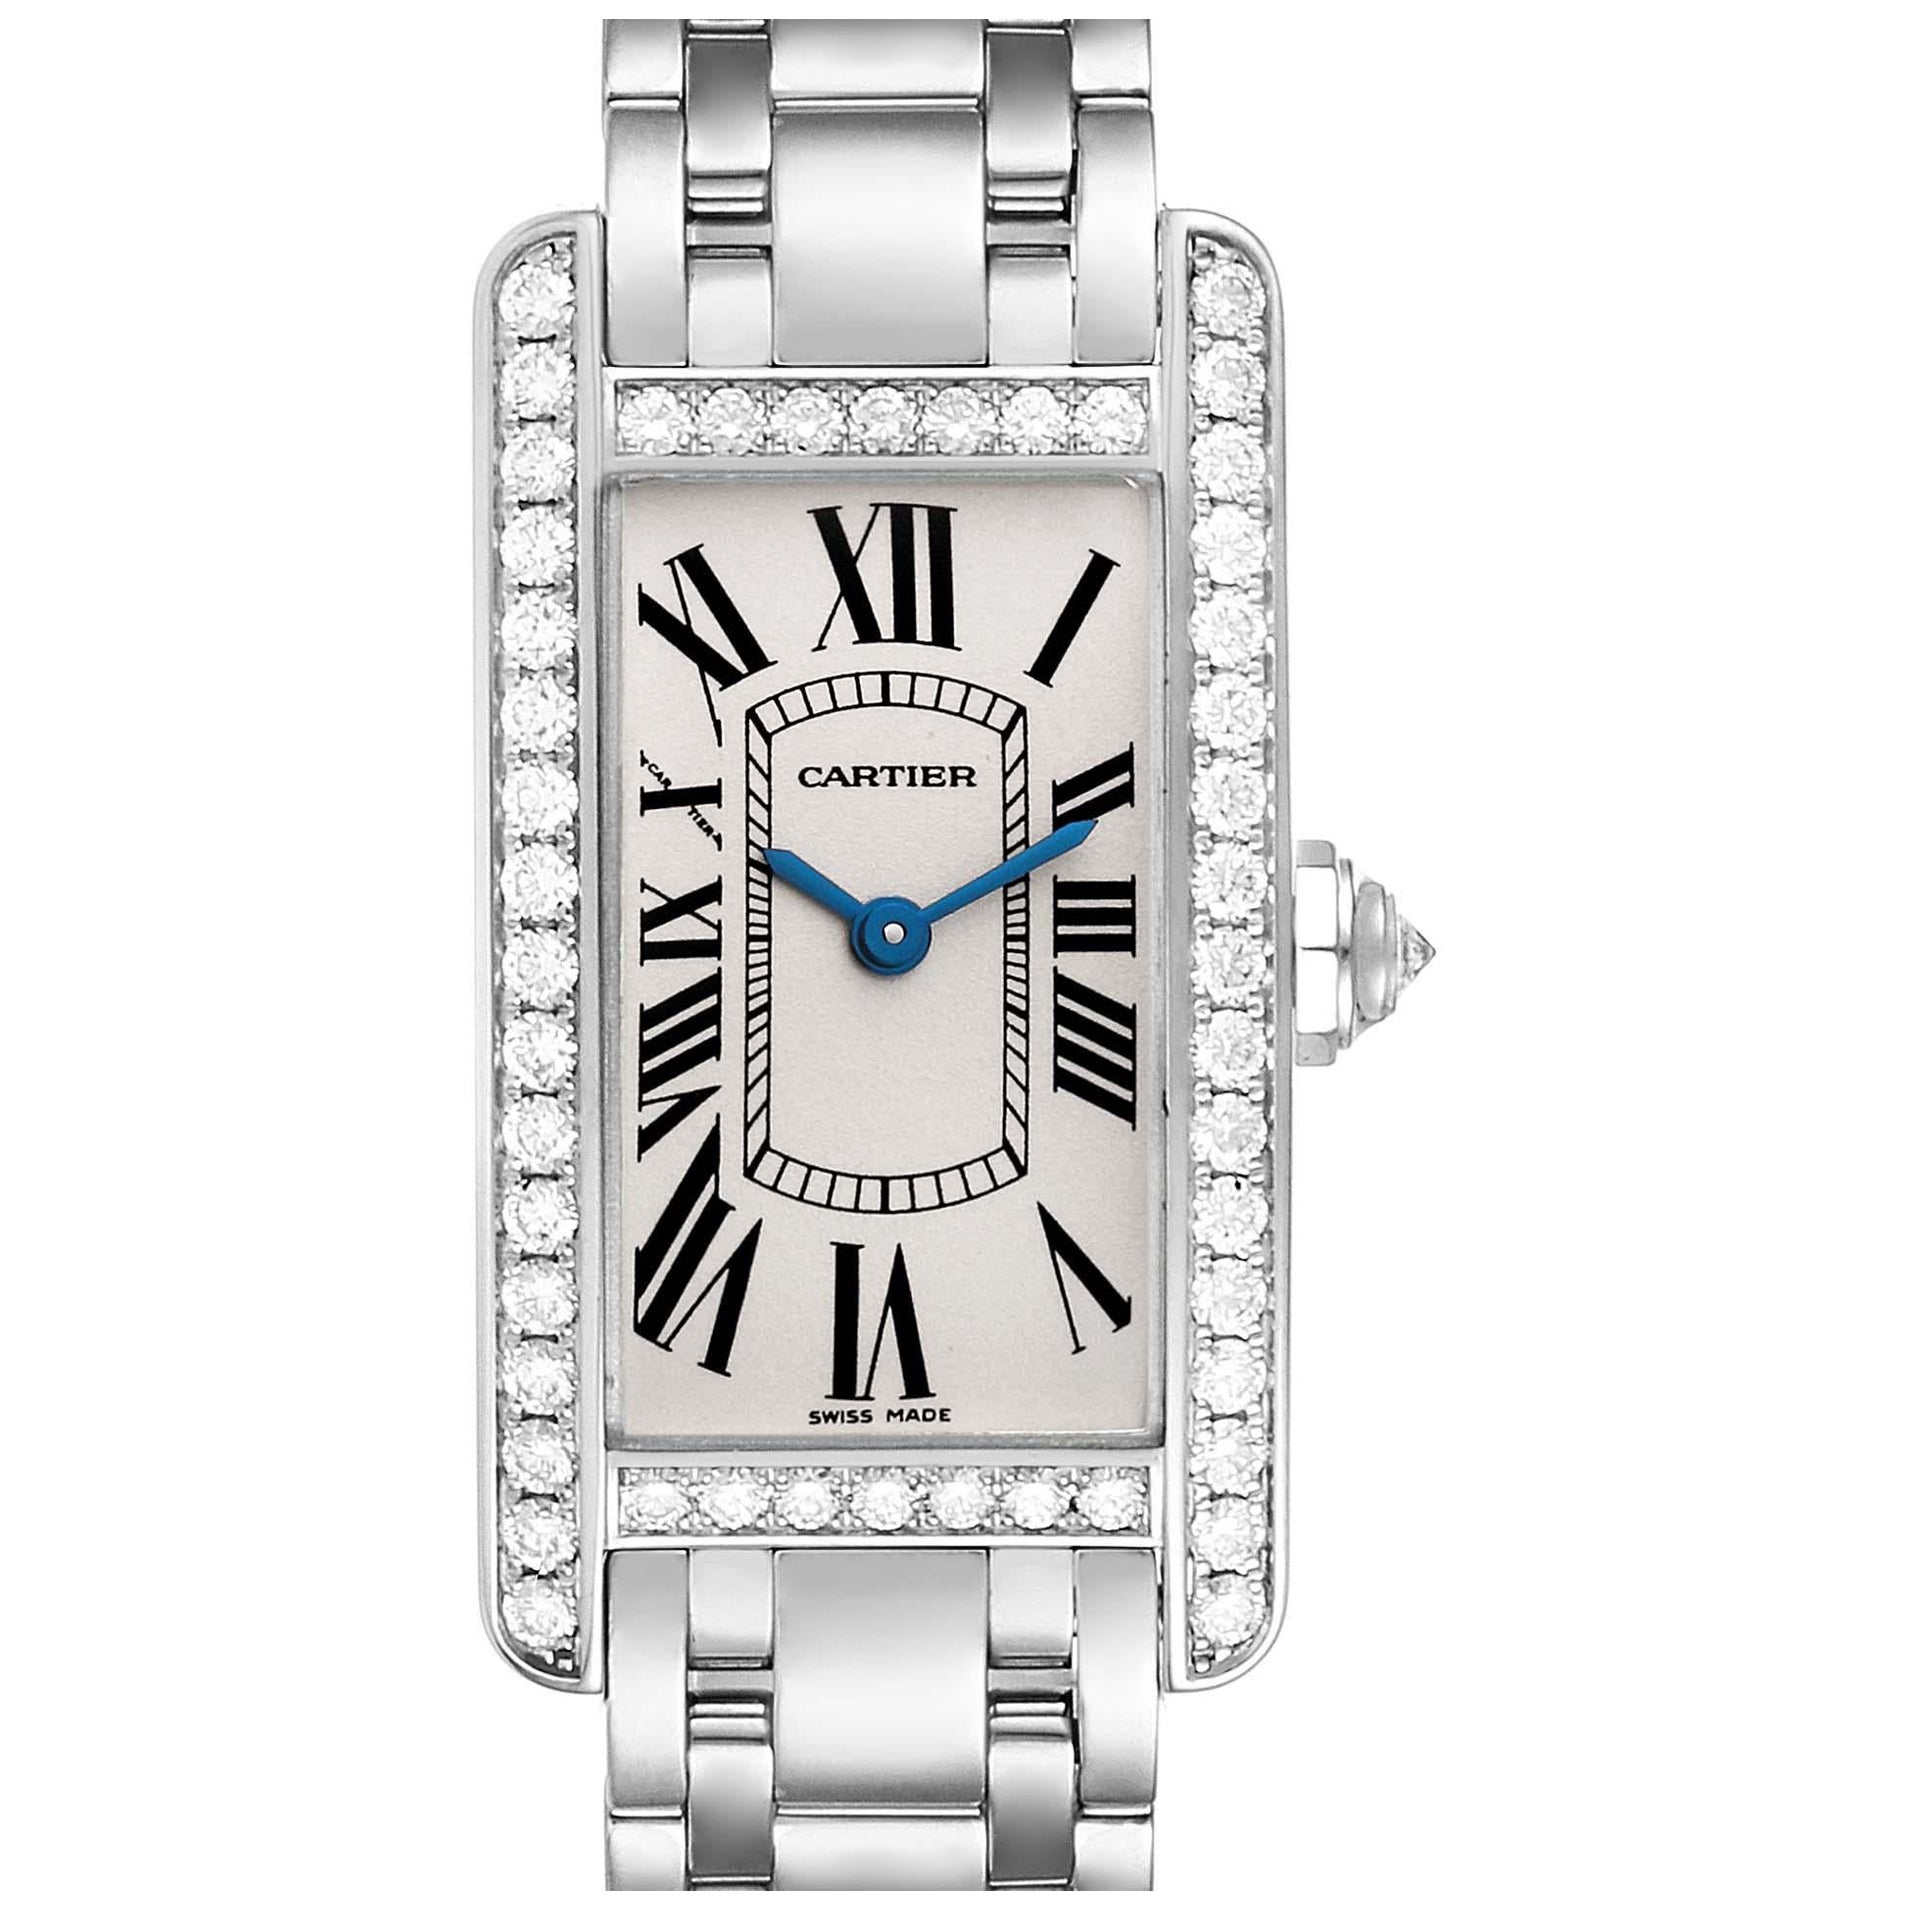 Cartier Tank Americaine White Gold Diamond Ladies Watch WB7073L1 Box Papers